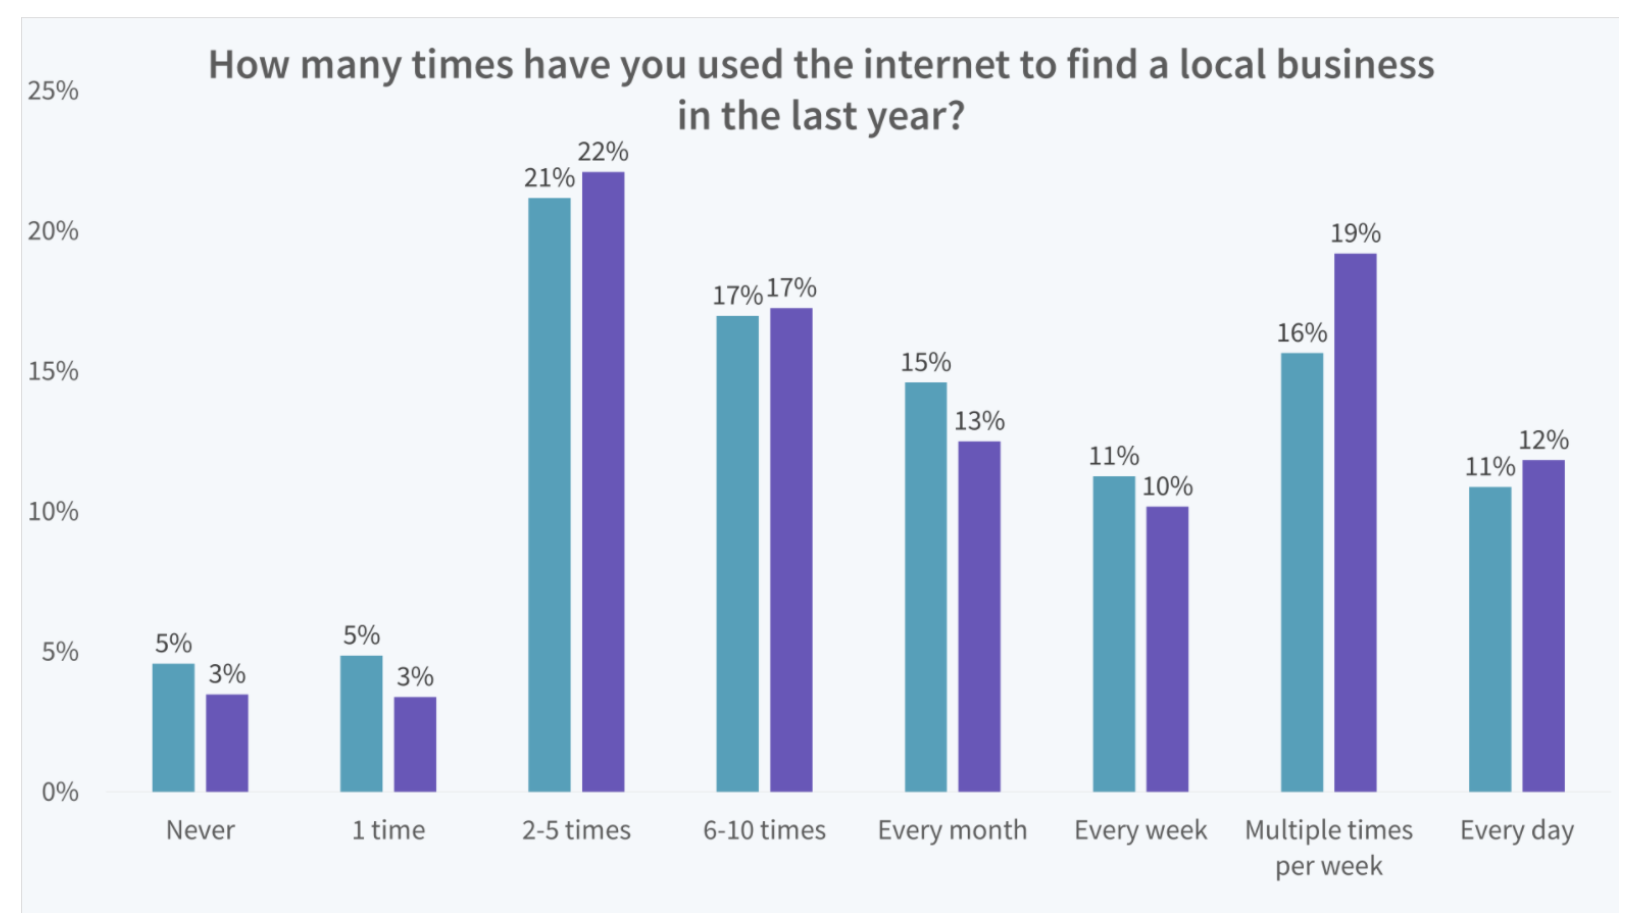 image of chart showing how many times people have used the internet to find a local business in the last year